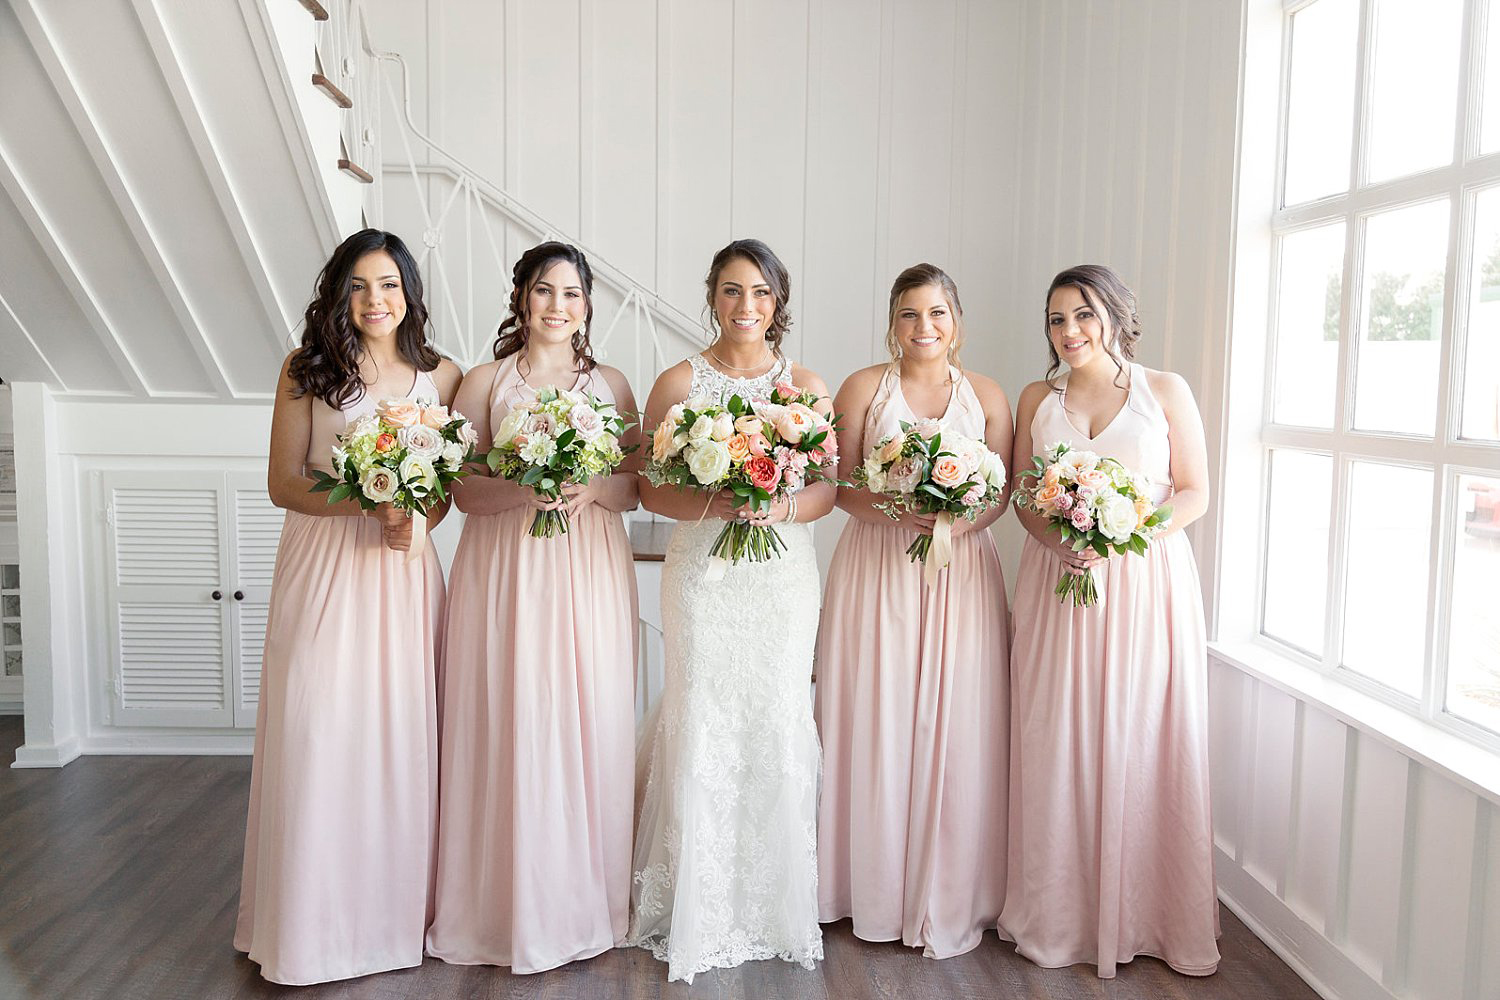 Blush bridesmaid dress with peach and pink bouquets